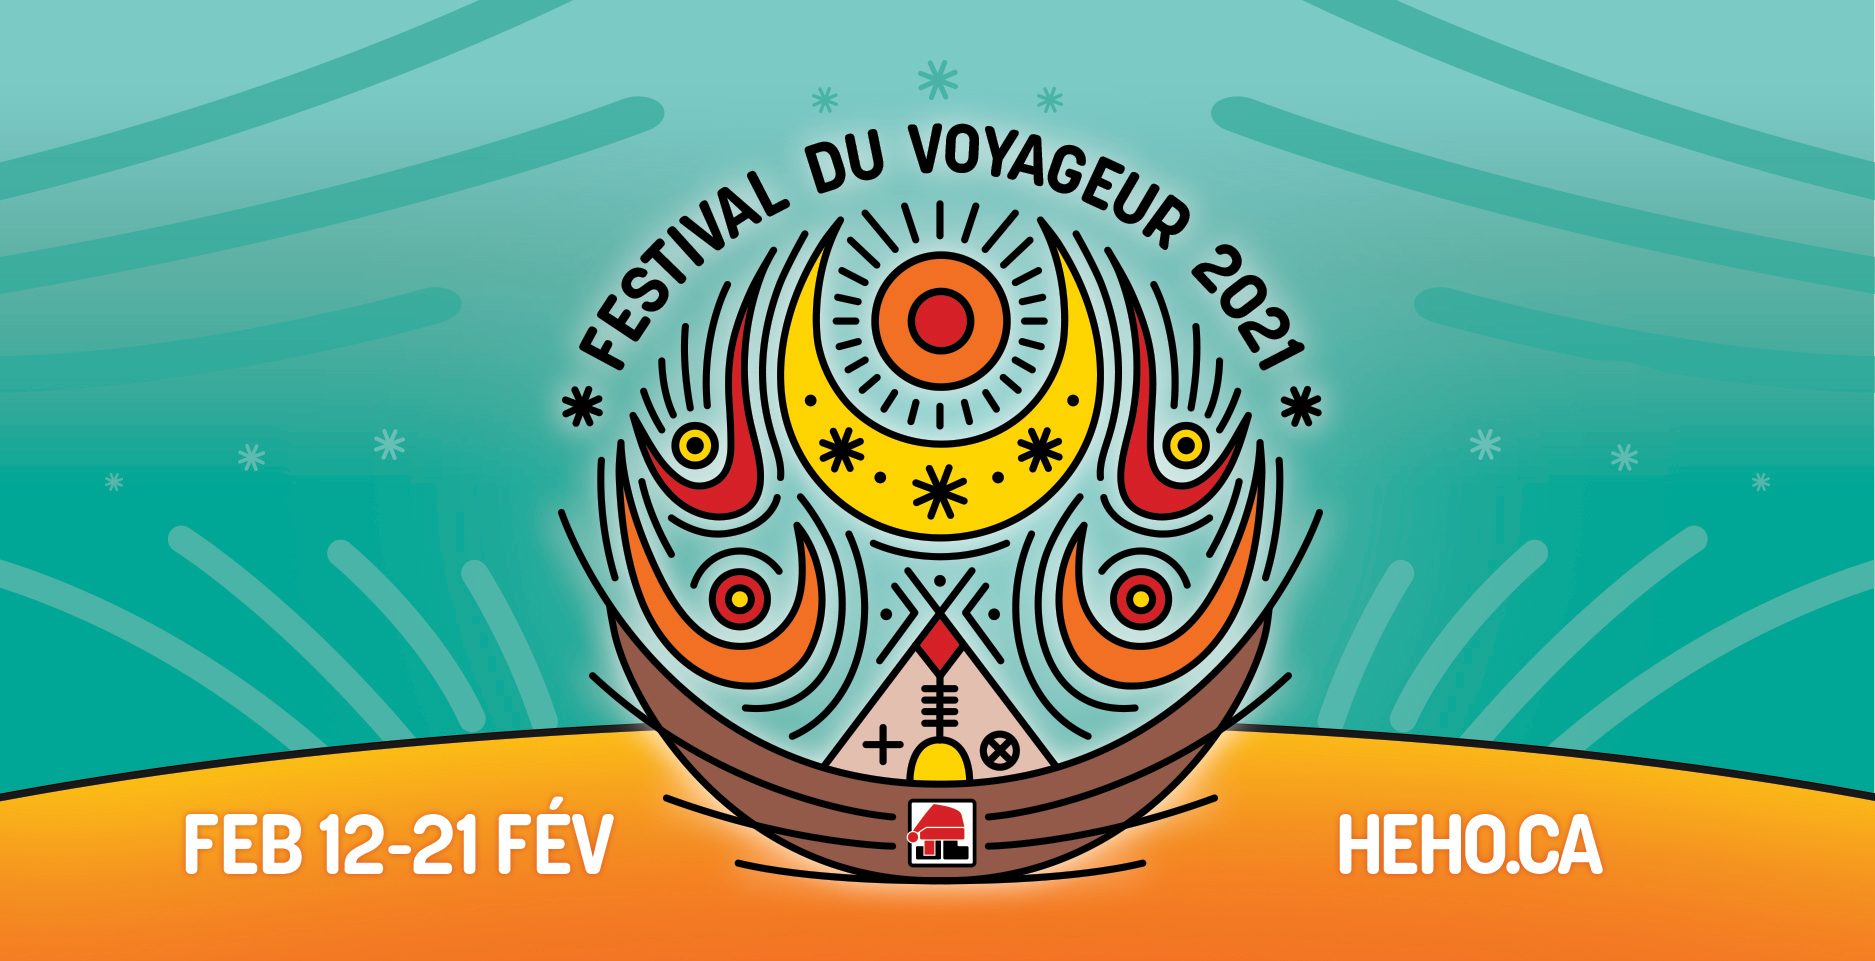 Featured image for “FESTIVAL DU VOYAGEUR PADDLING AHEAD WITH MODIFIED FORMAT”